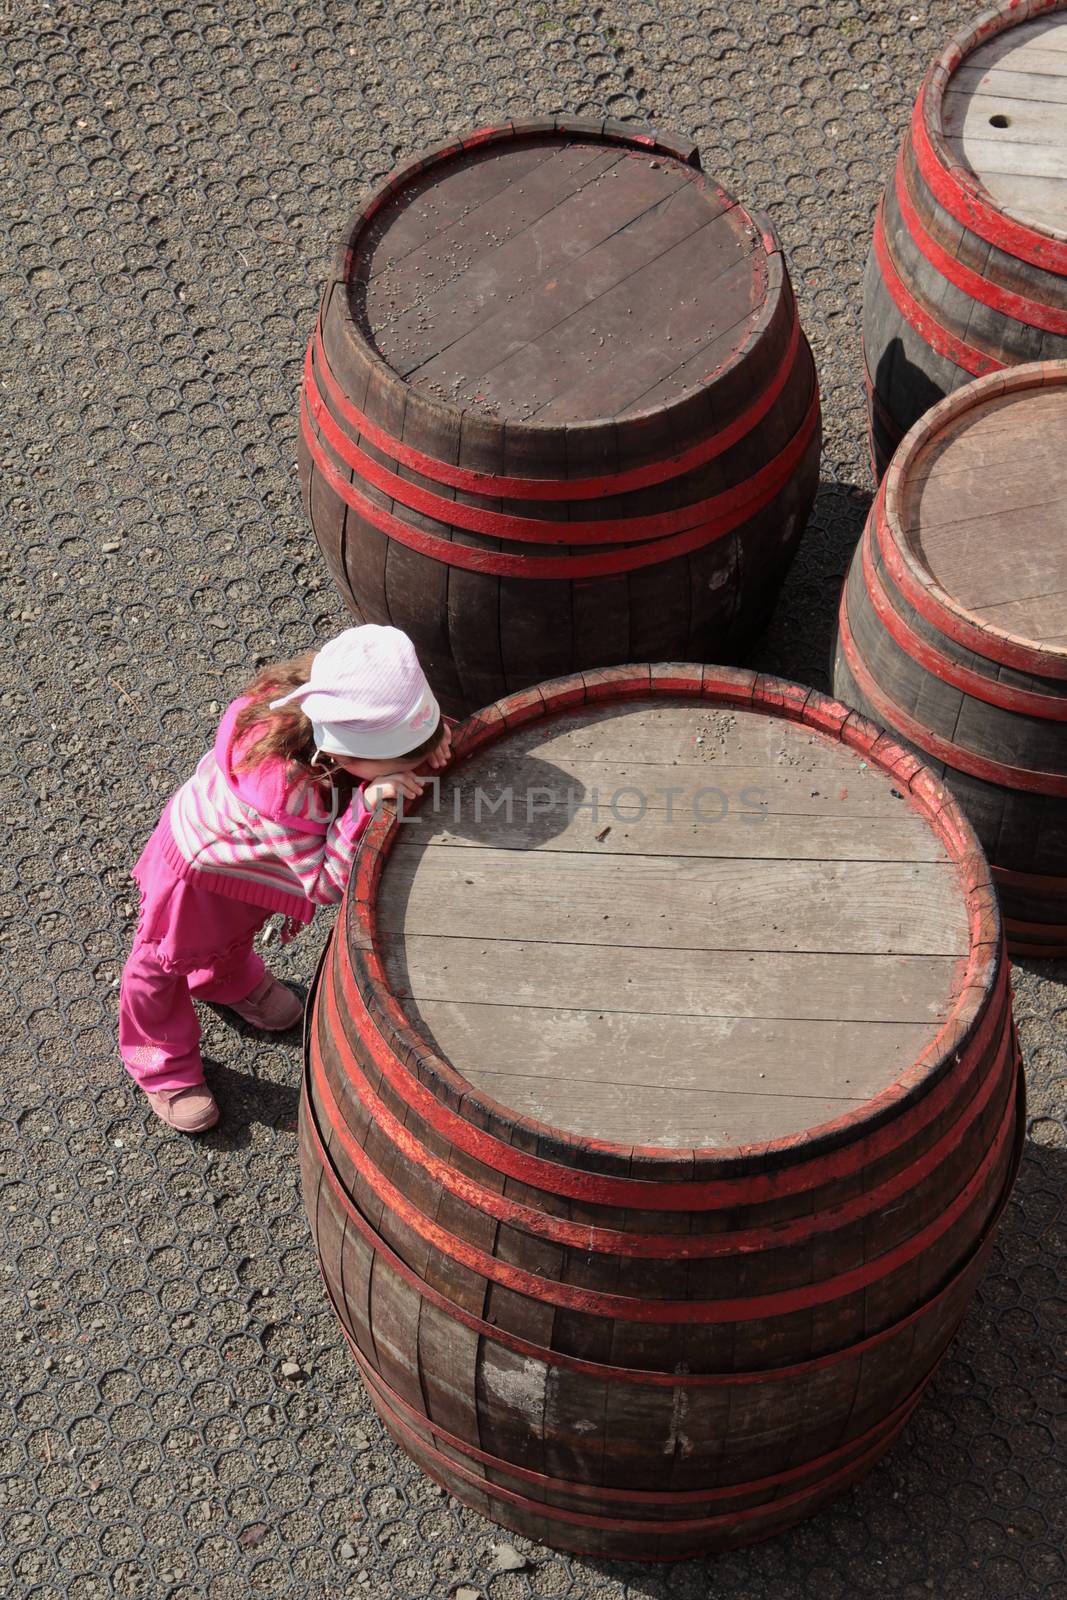 Sad, lonely child leaning on the barrel.